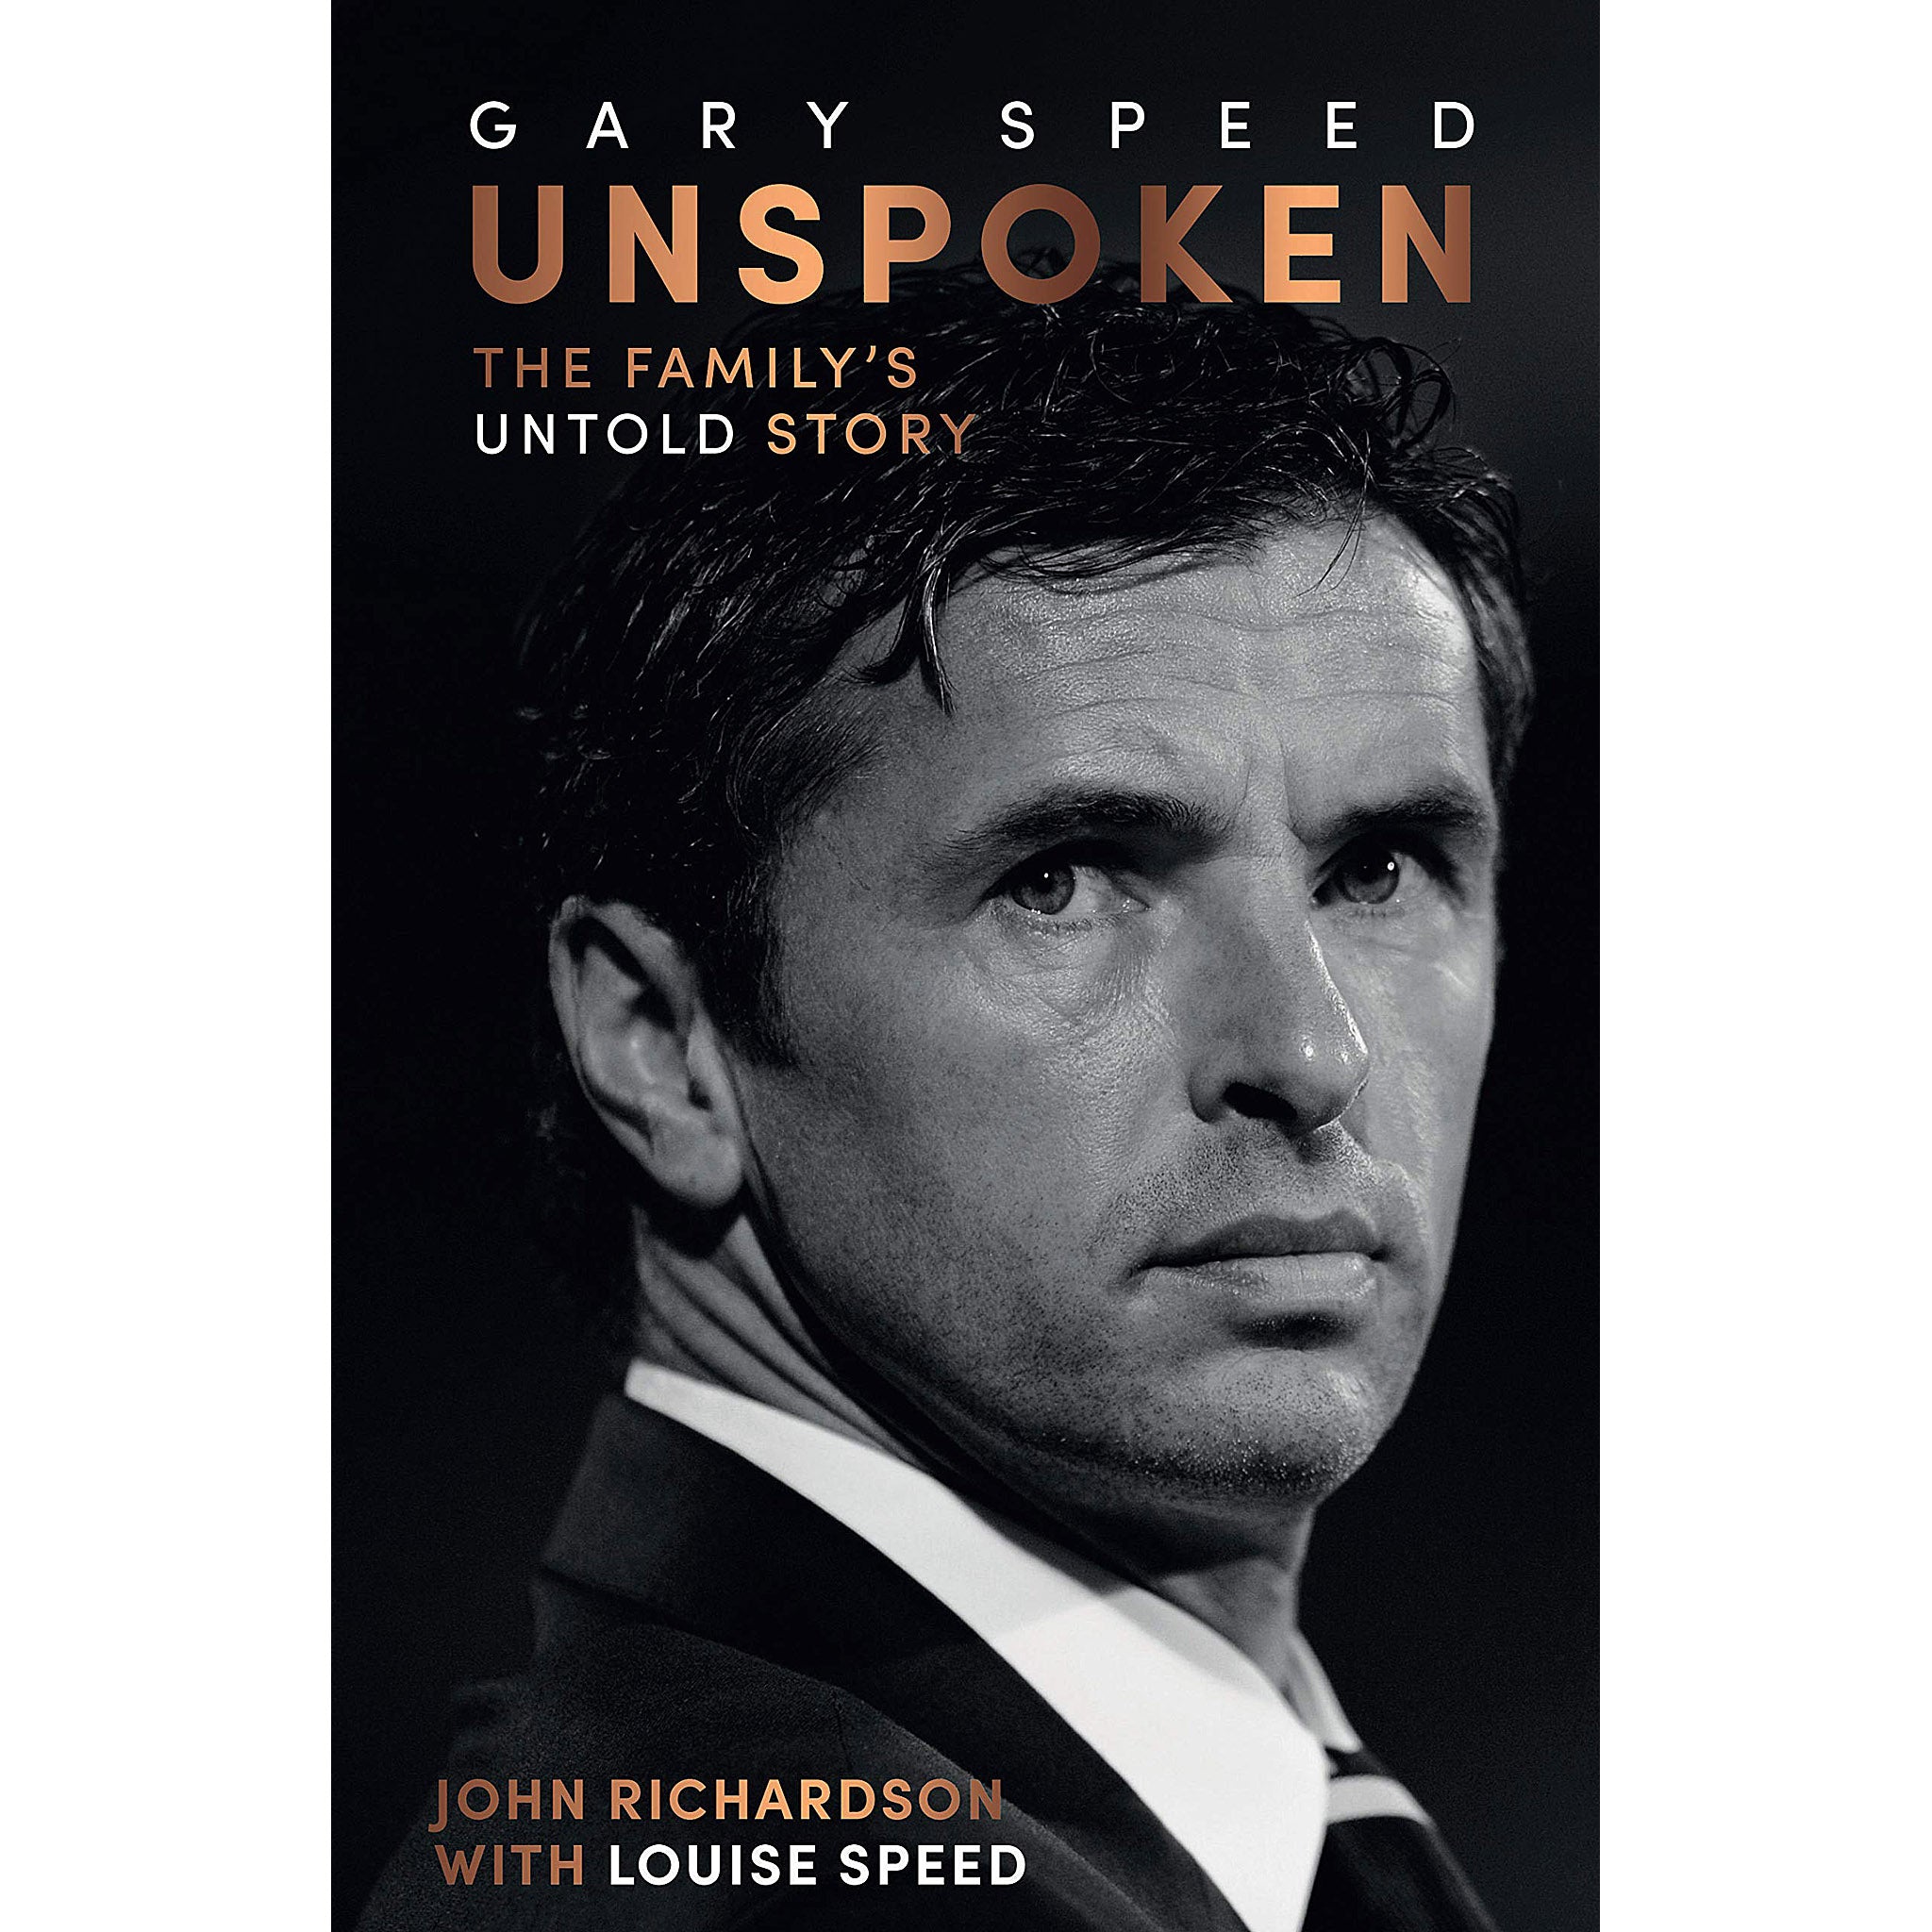 Gary Speed – Unspoken – The Family's Untold Story